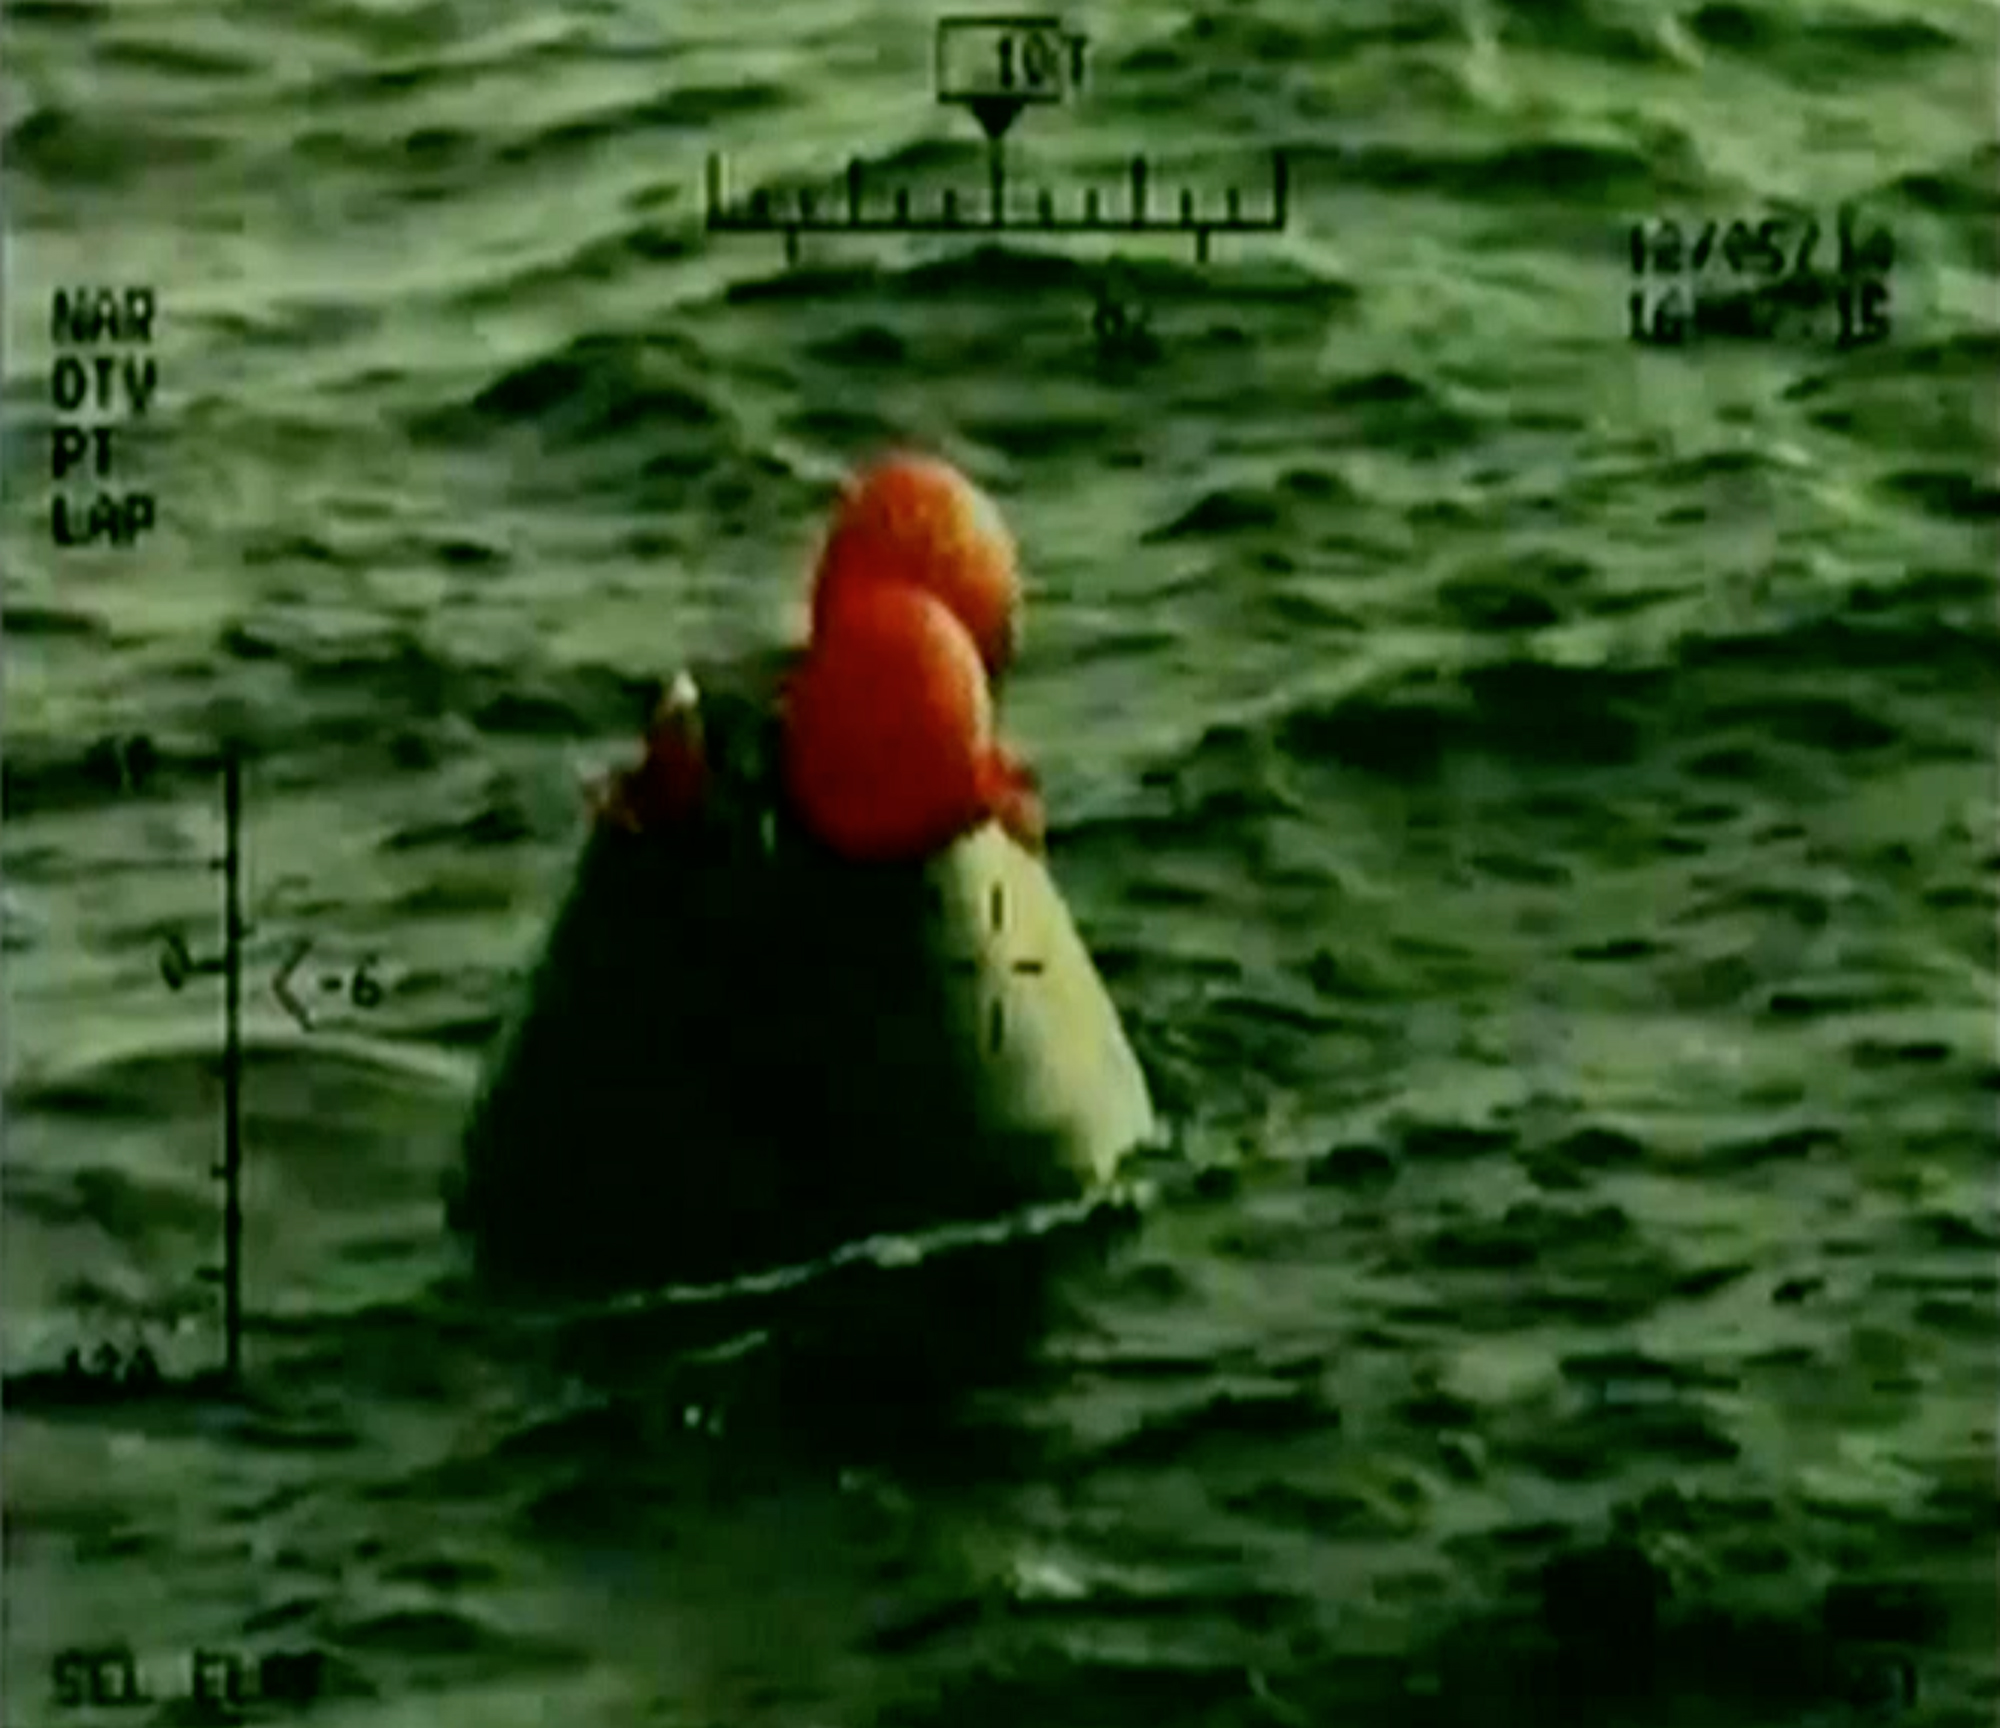 PHOTO: In this frame grab from NASA-TV, the Orion capsule floats after splashing down in the Pacific Ocean, Dec. 5, 2014.